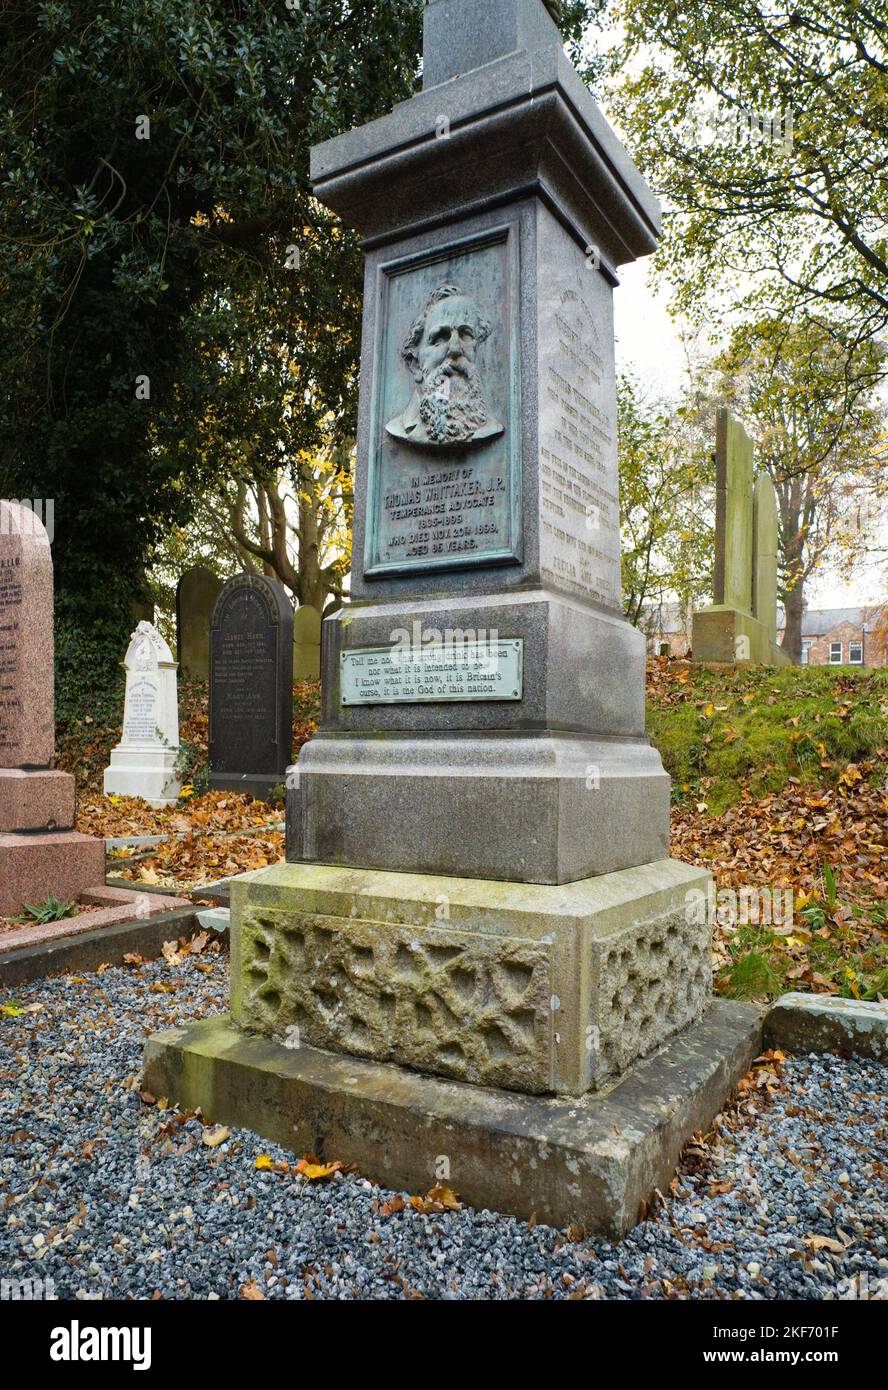 Gravestone at Manor Road cemetery in Scarborough of Thomas Whittaker JP a temperance advocate who died in 1899 aged 86 years. Stock Photo